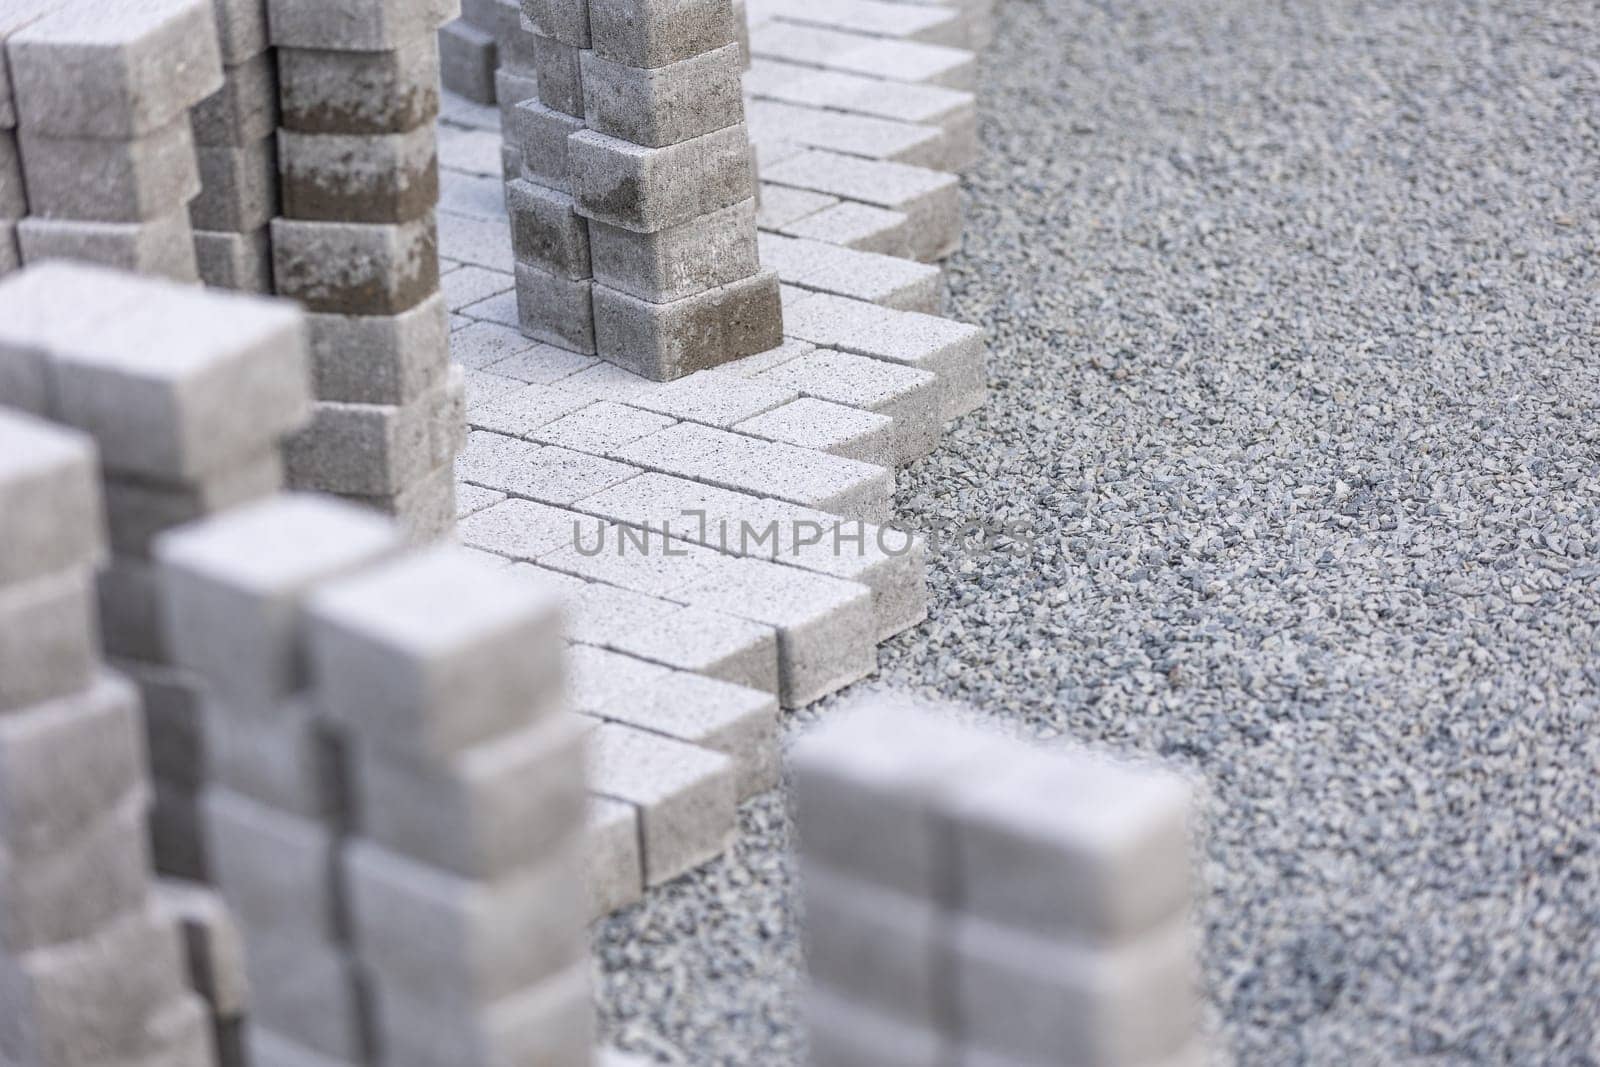 Process of building a new path made from concrete blocks, interlocking pave